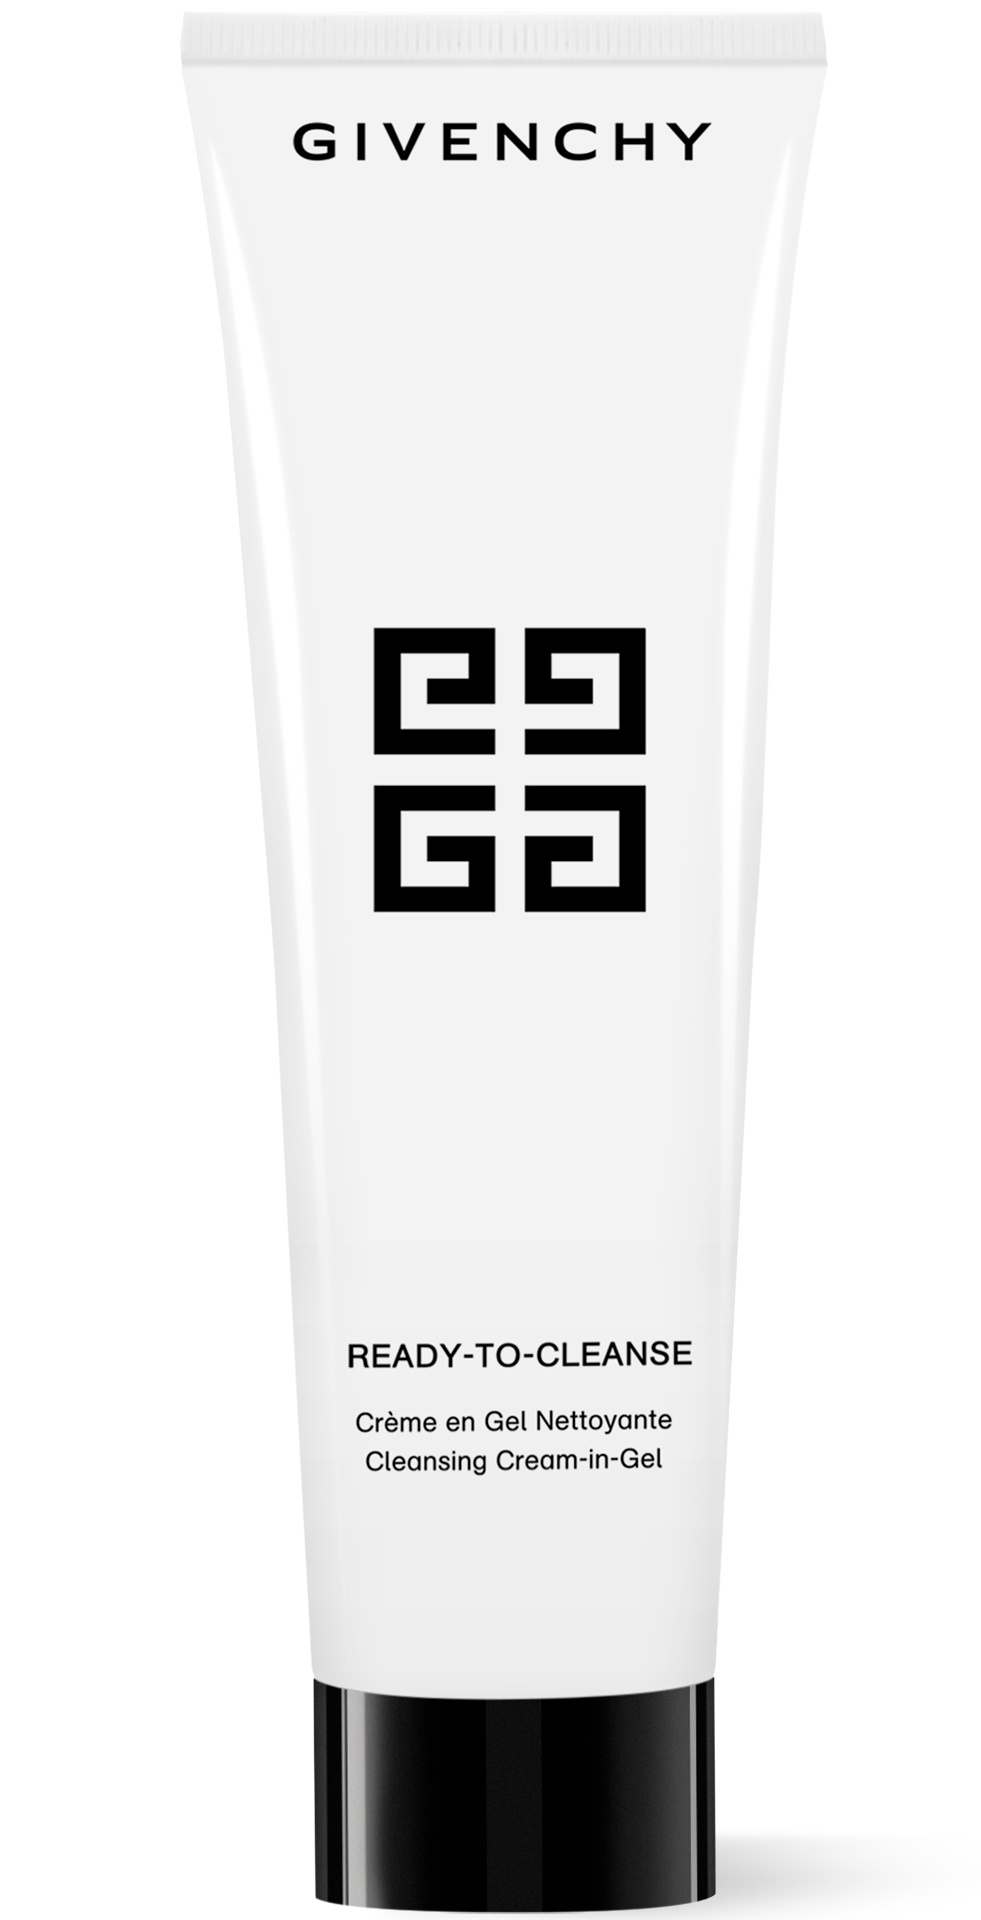 Givenchy Ready-To-Cleanse Cleansing Cream-in-Gel